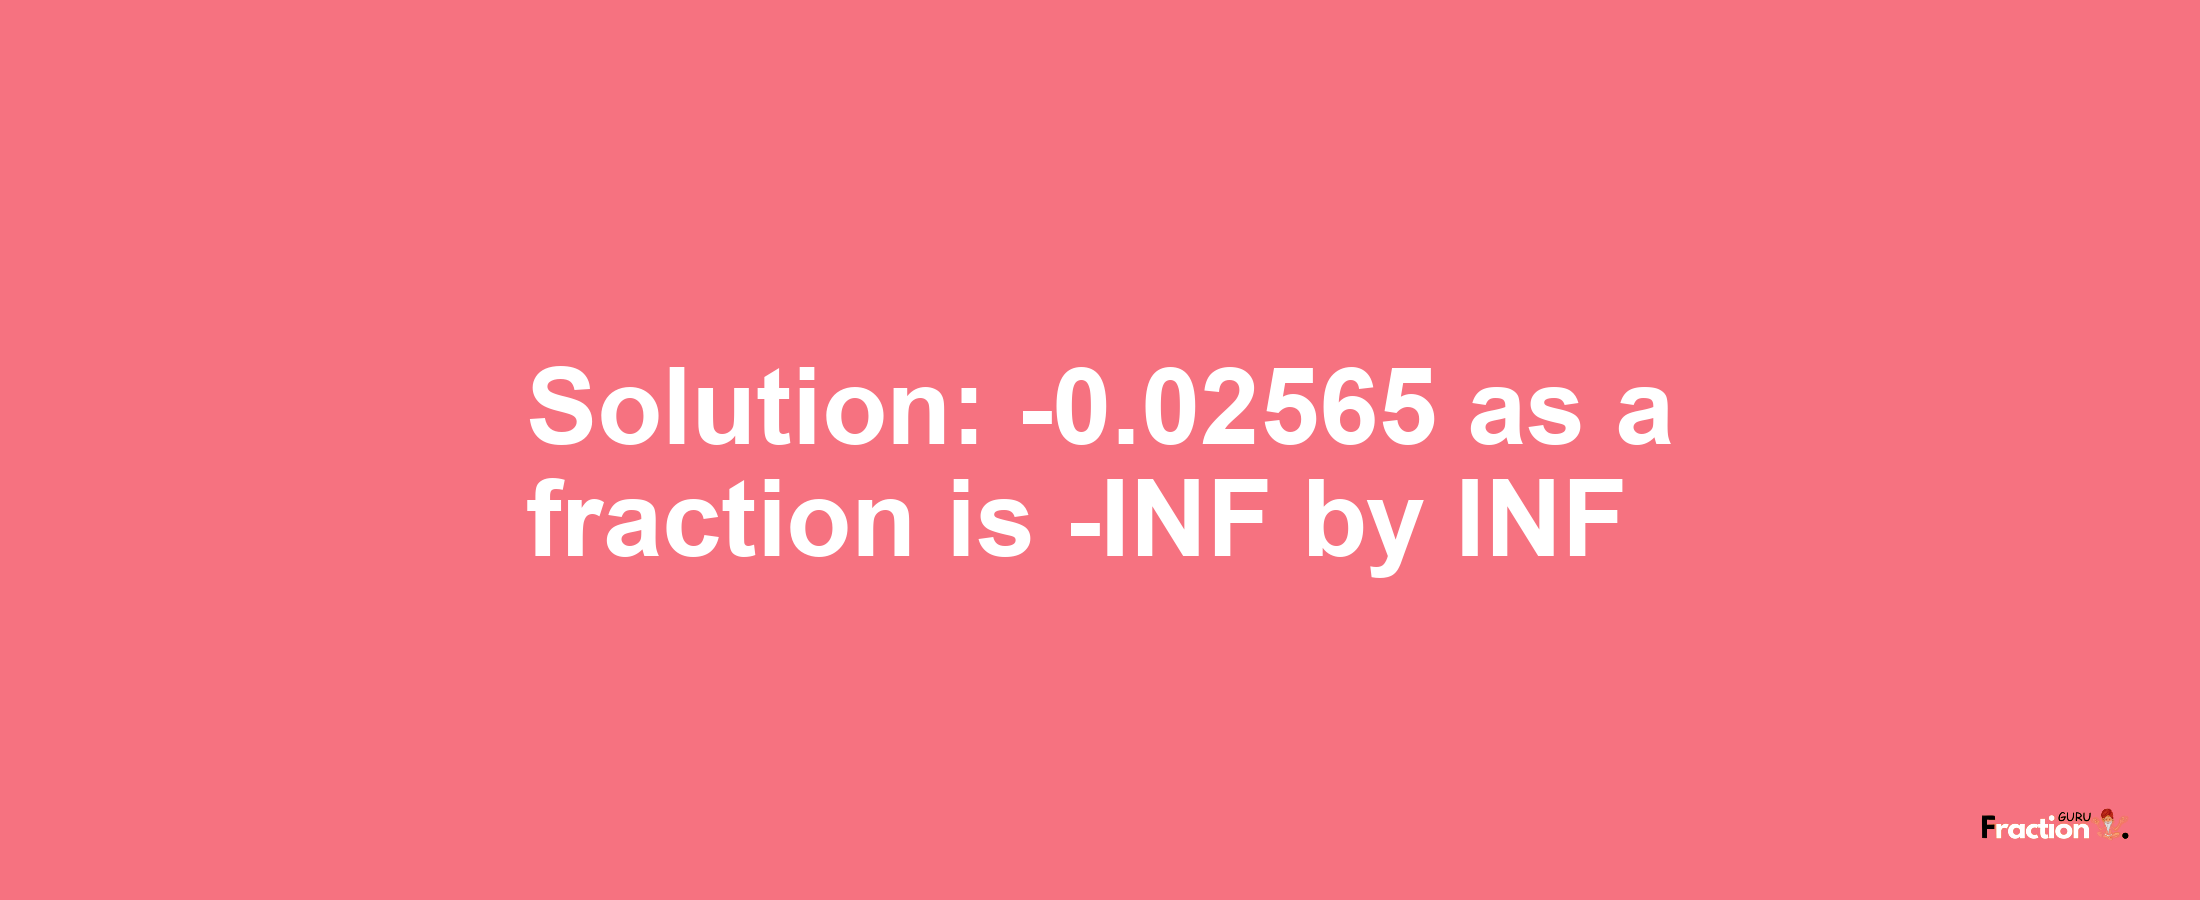 Solution:-0.02565 as a fraction is -INF/INF